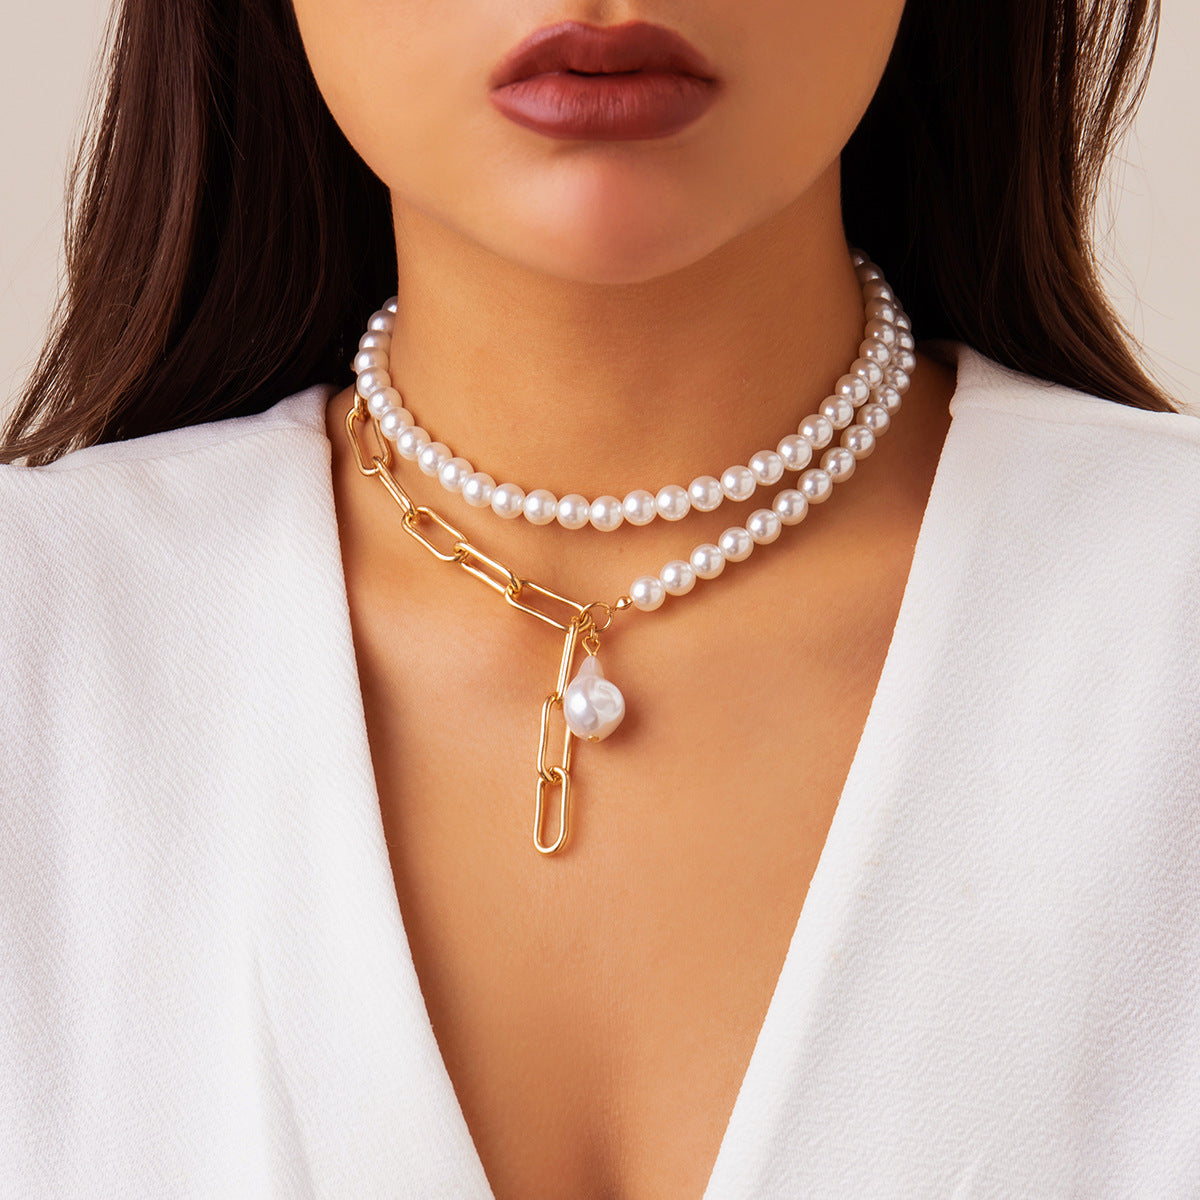 WILLOW - NECKLACE | 50% OFF!